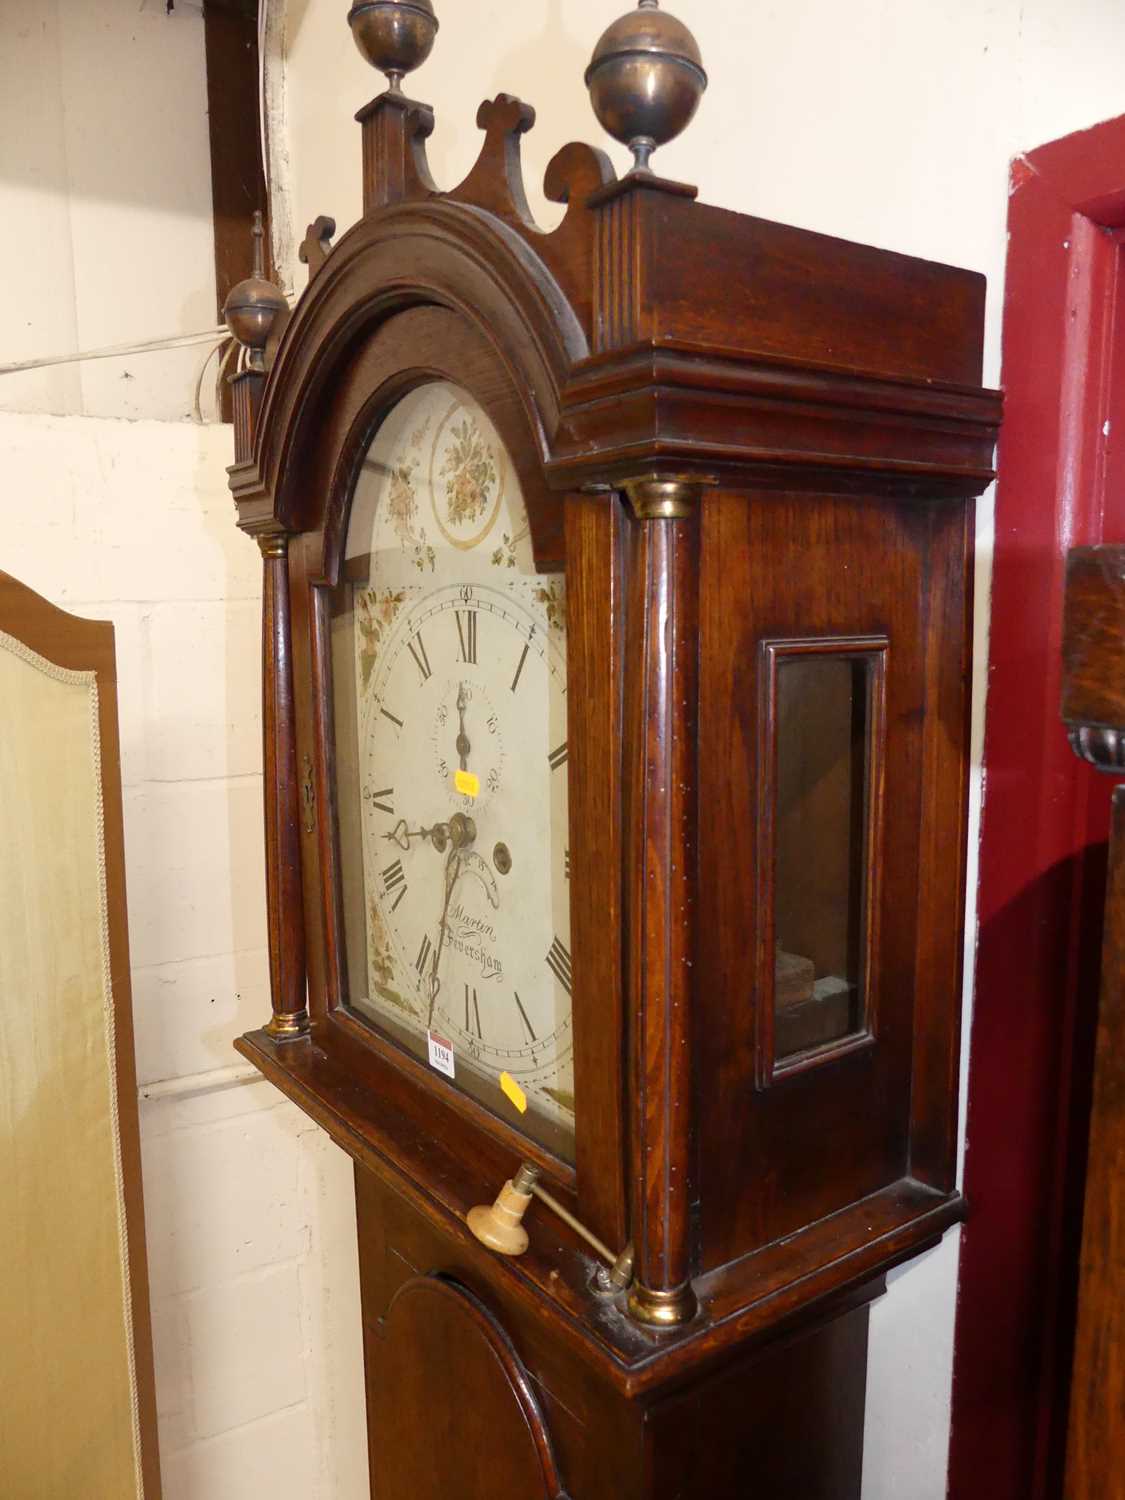 Martin of Feversham - early 19th century oak longcase clock, having a 12" painted arched dial, - Image 9 of 10